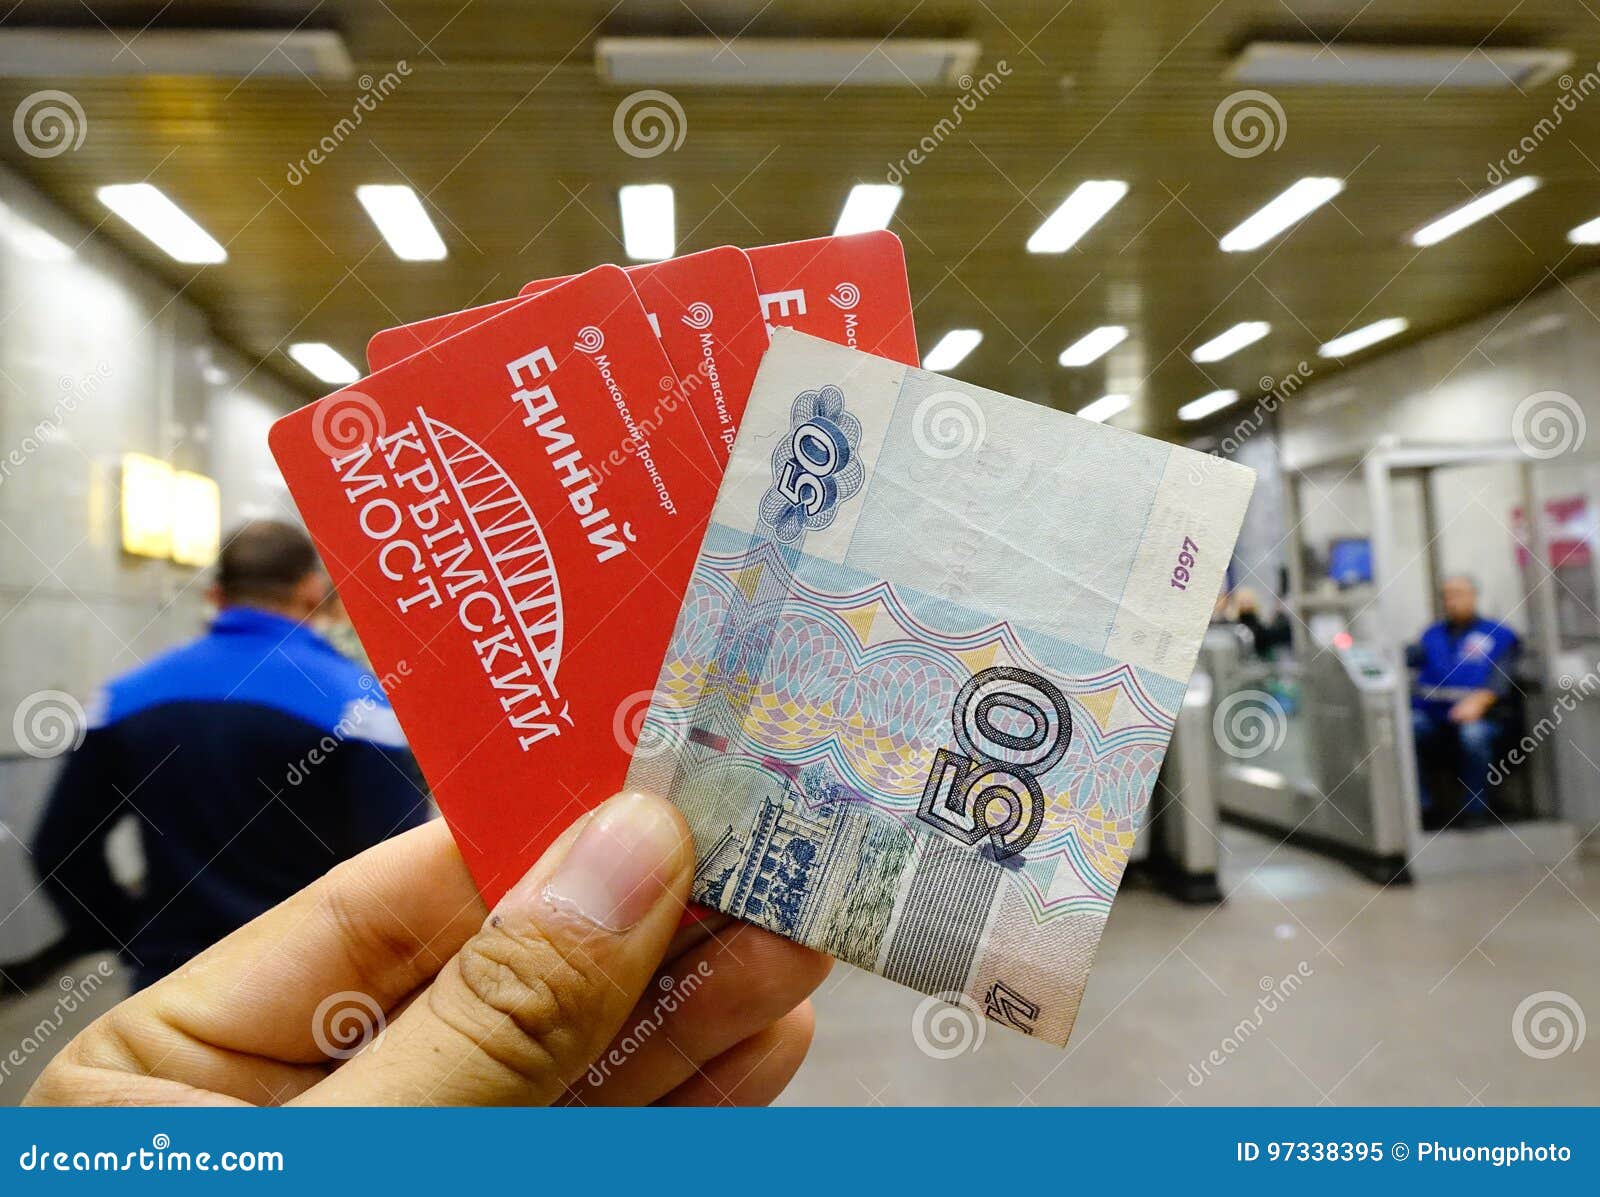 Russian train tickets. Ticket types in Russia. Purchase Russian train  tickets online at discount prices.